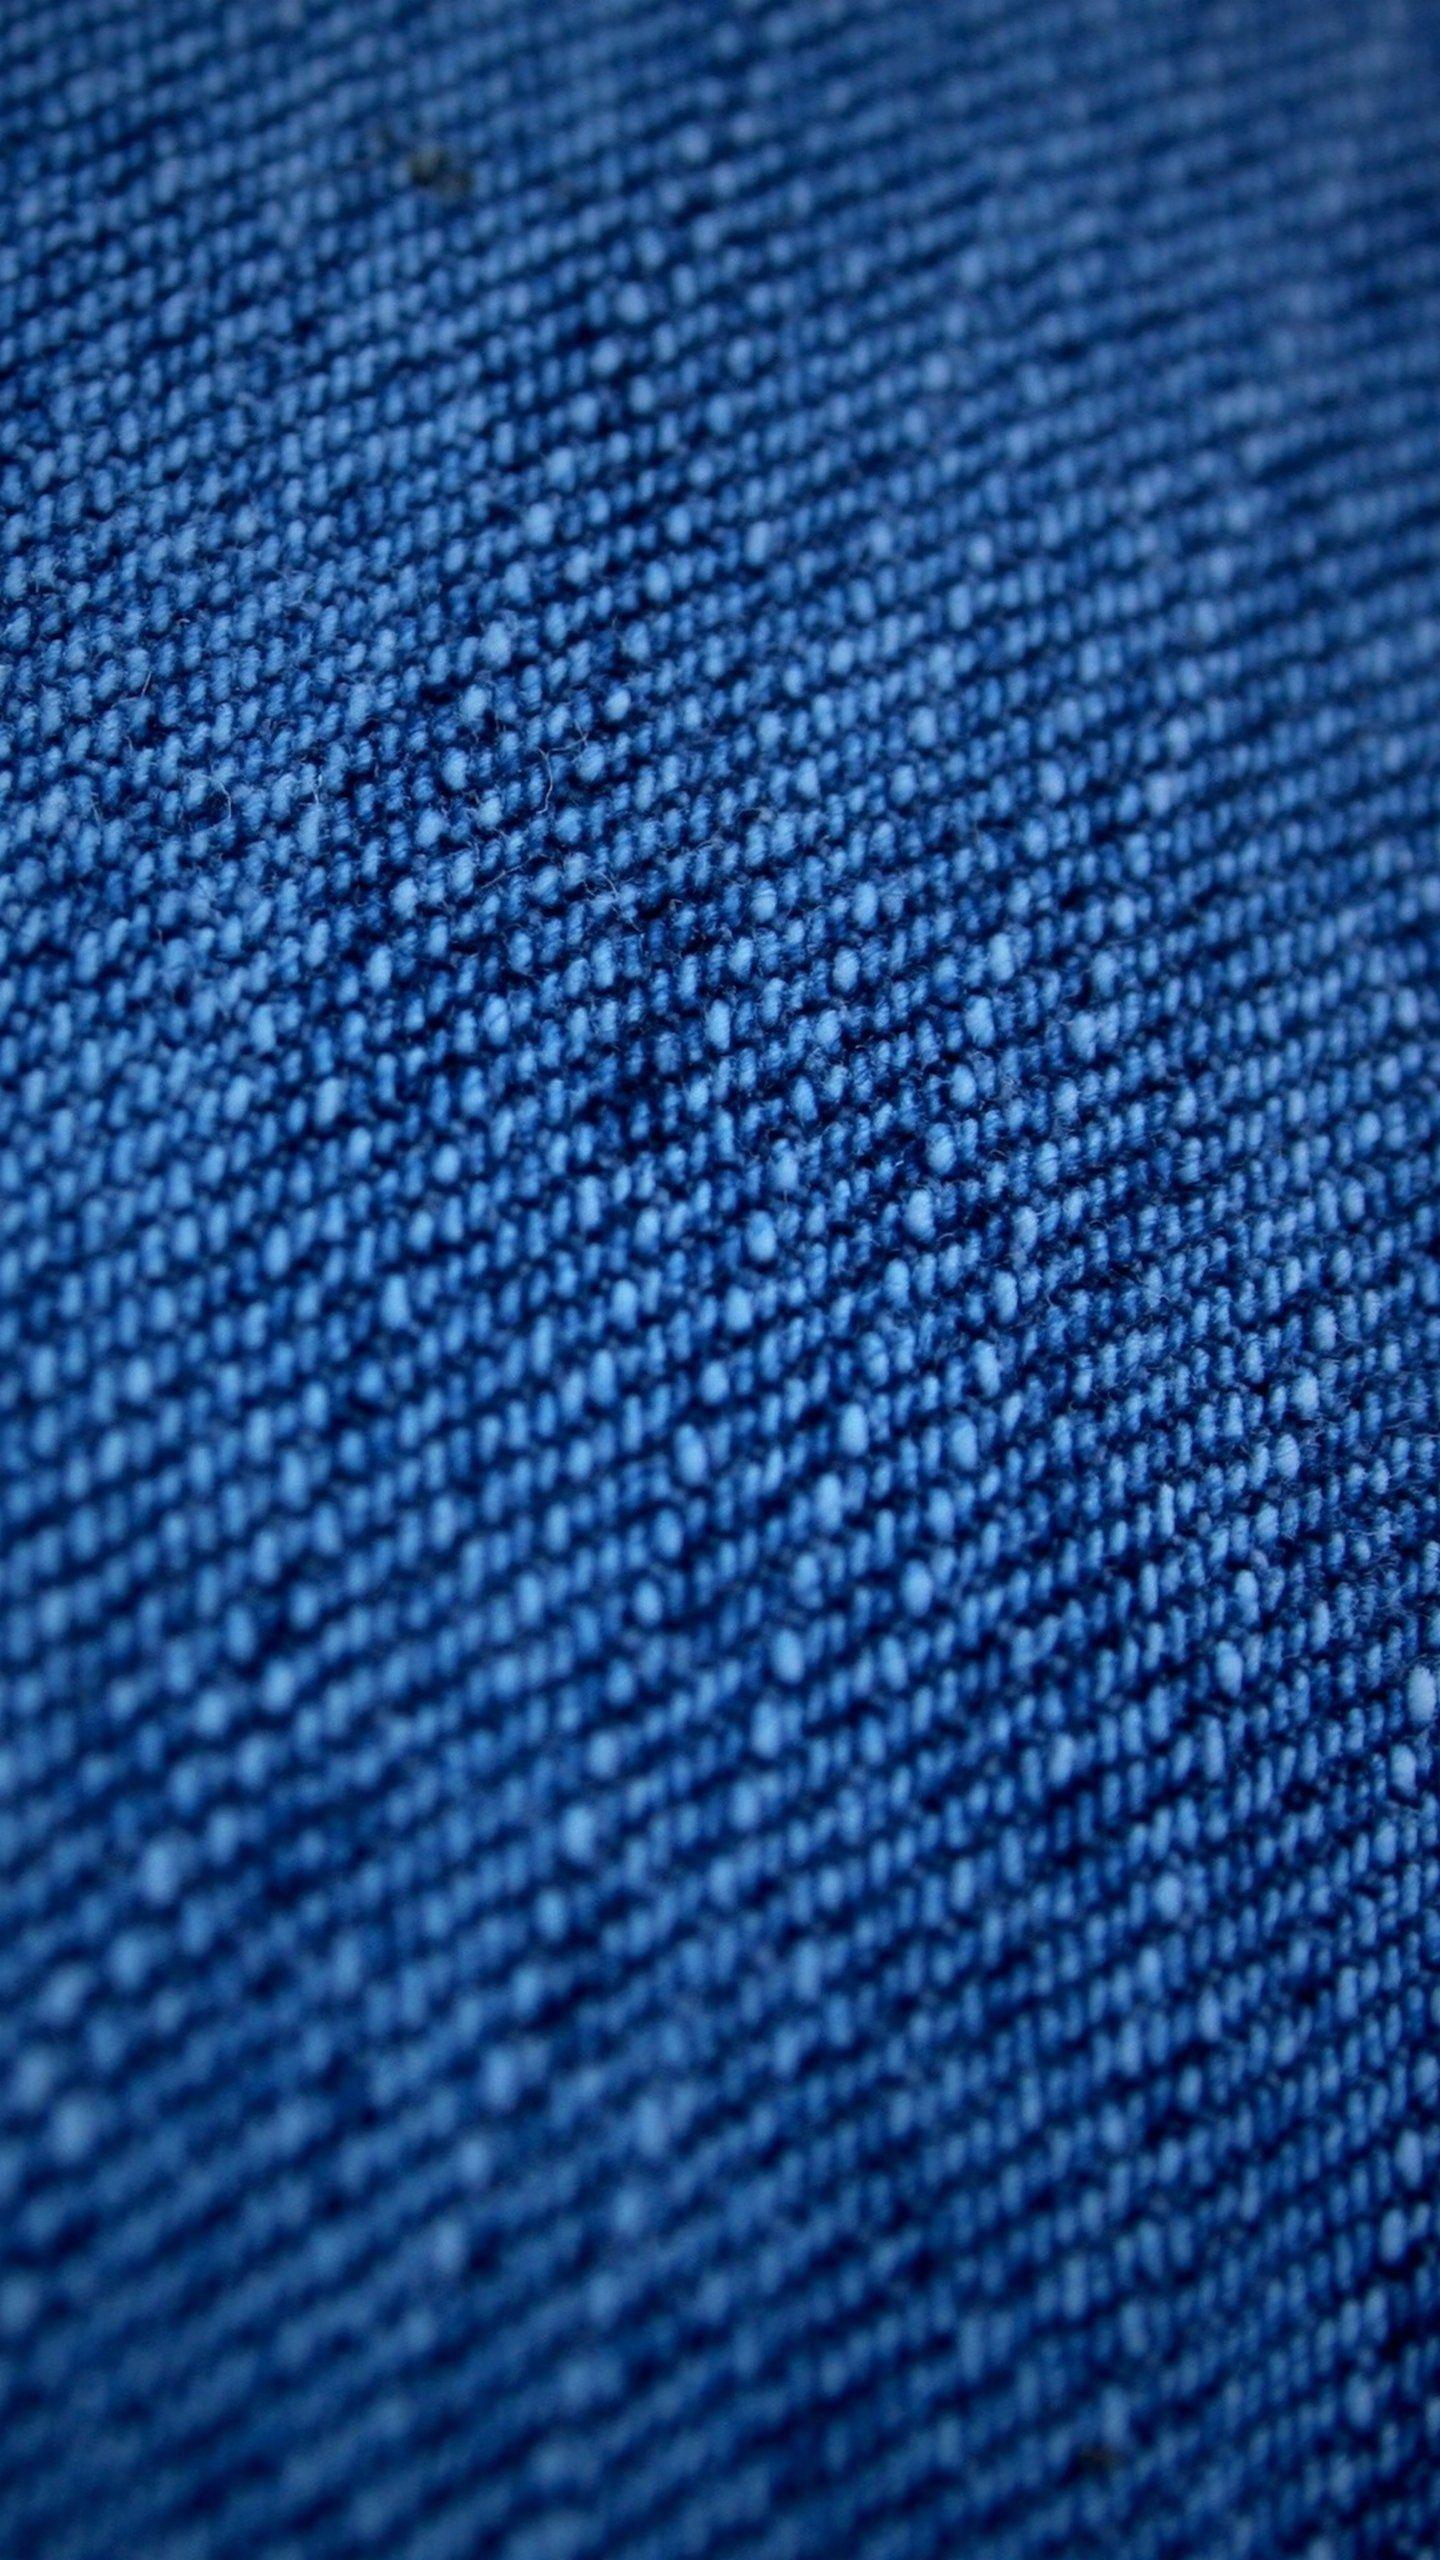 Jeans Wallpapers - Wallpaper Cave